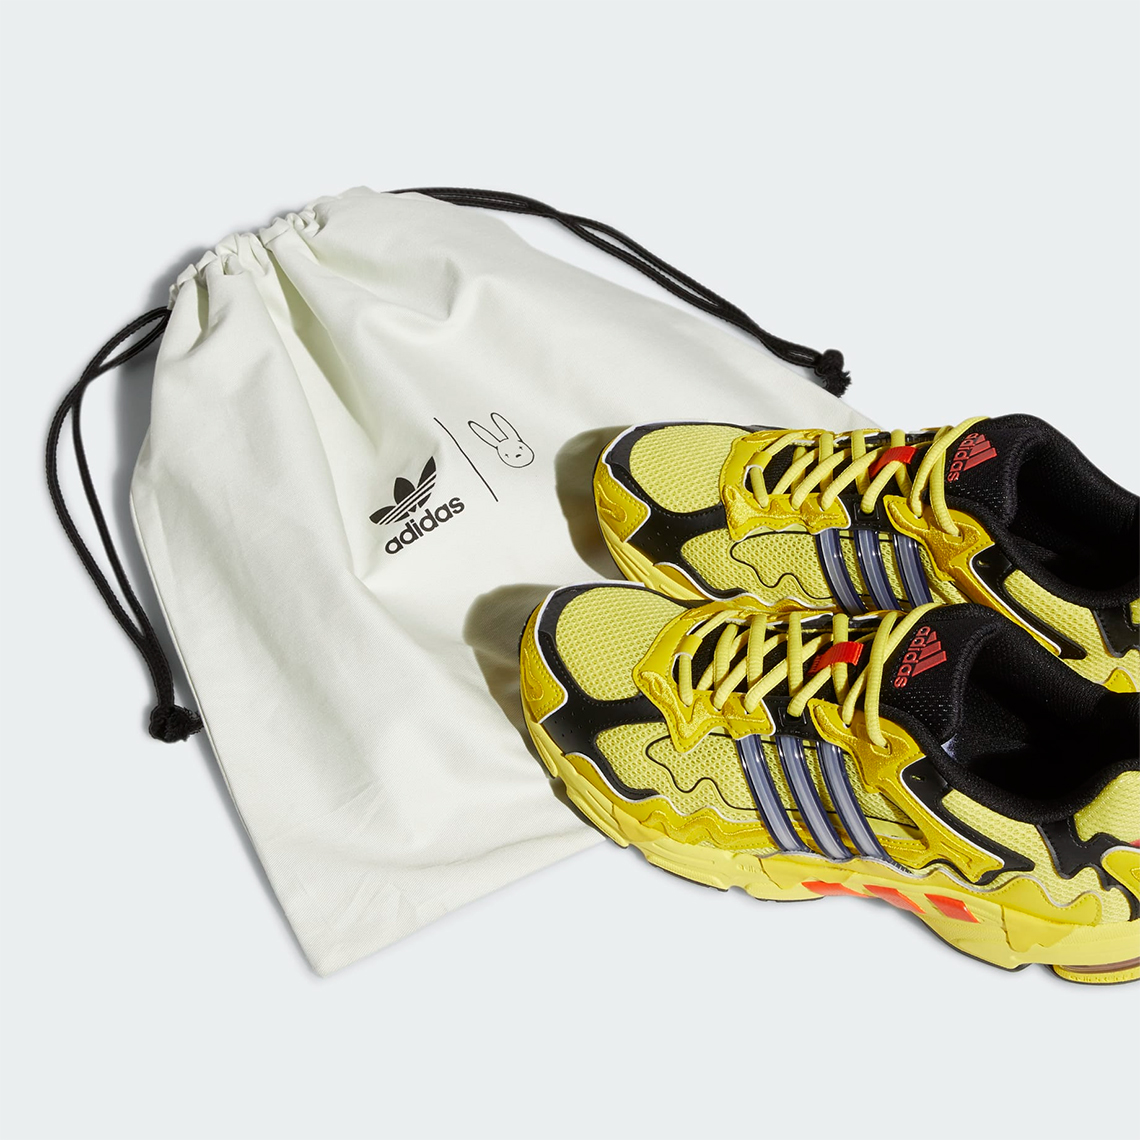 adidas response cl bad bunny yellow gy0101 release date 4